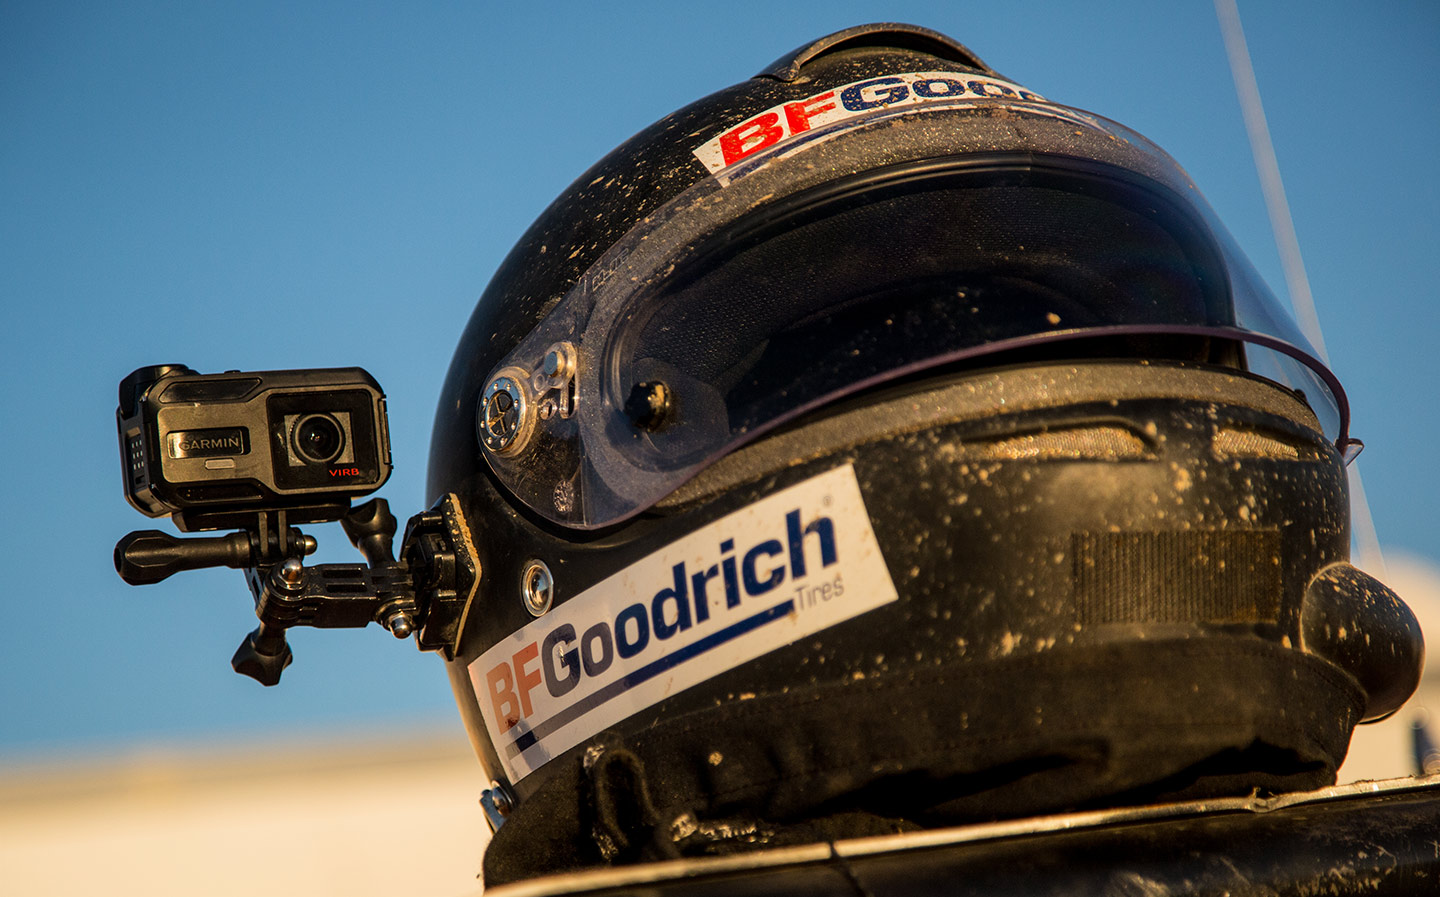 Products: Action cams from GoPro, TomTom and Garmin reviewed